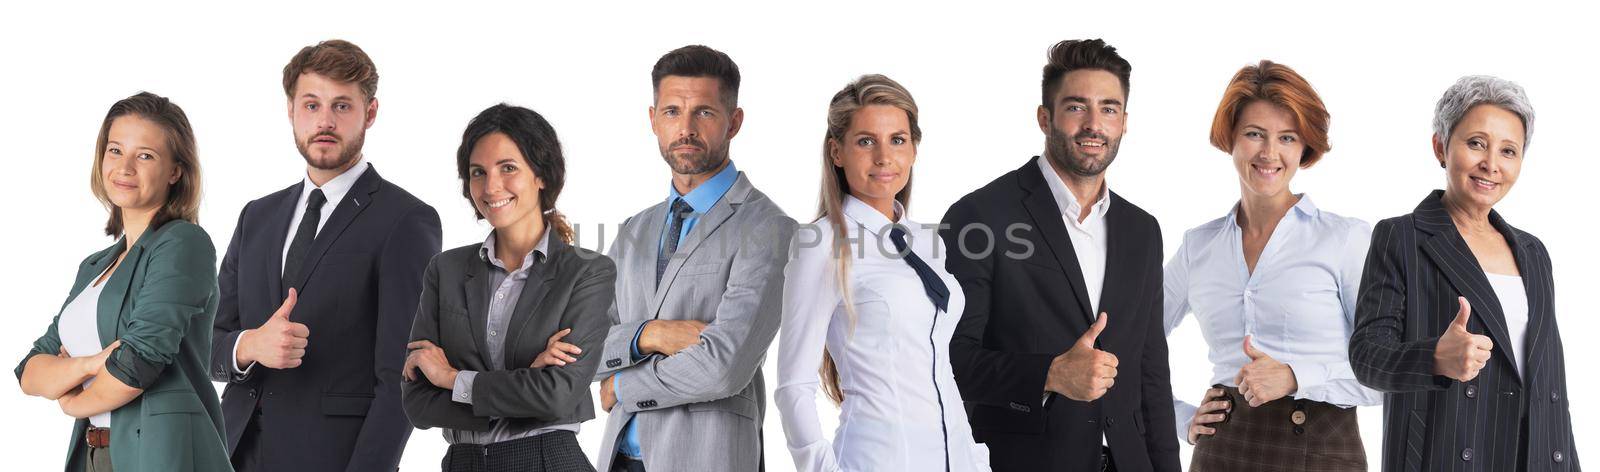 Team of business people with thumbs up sign standing together isolated on white background